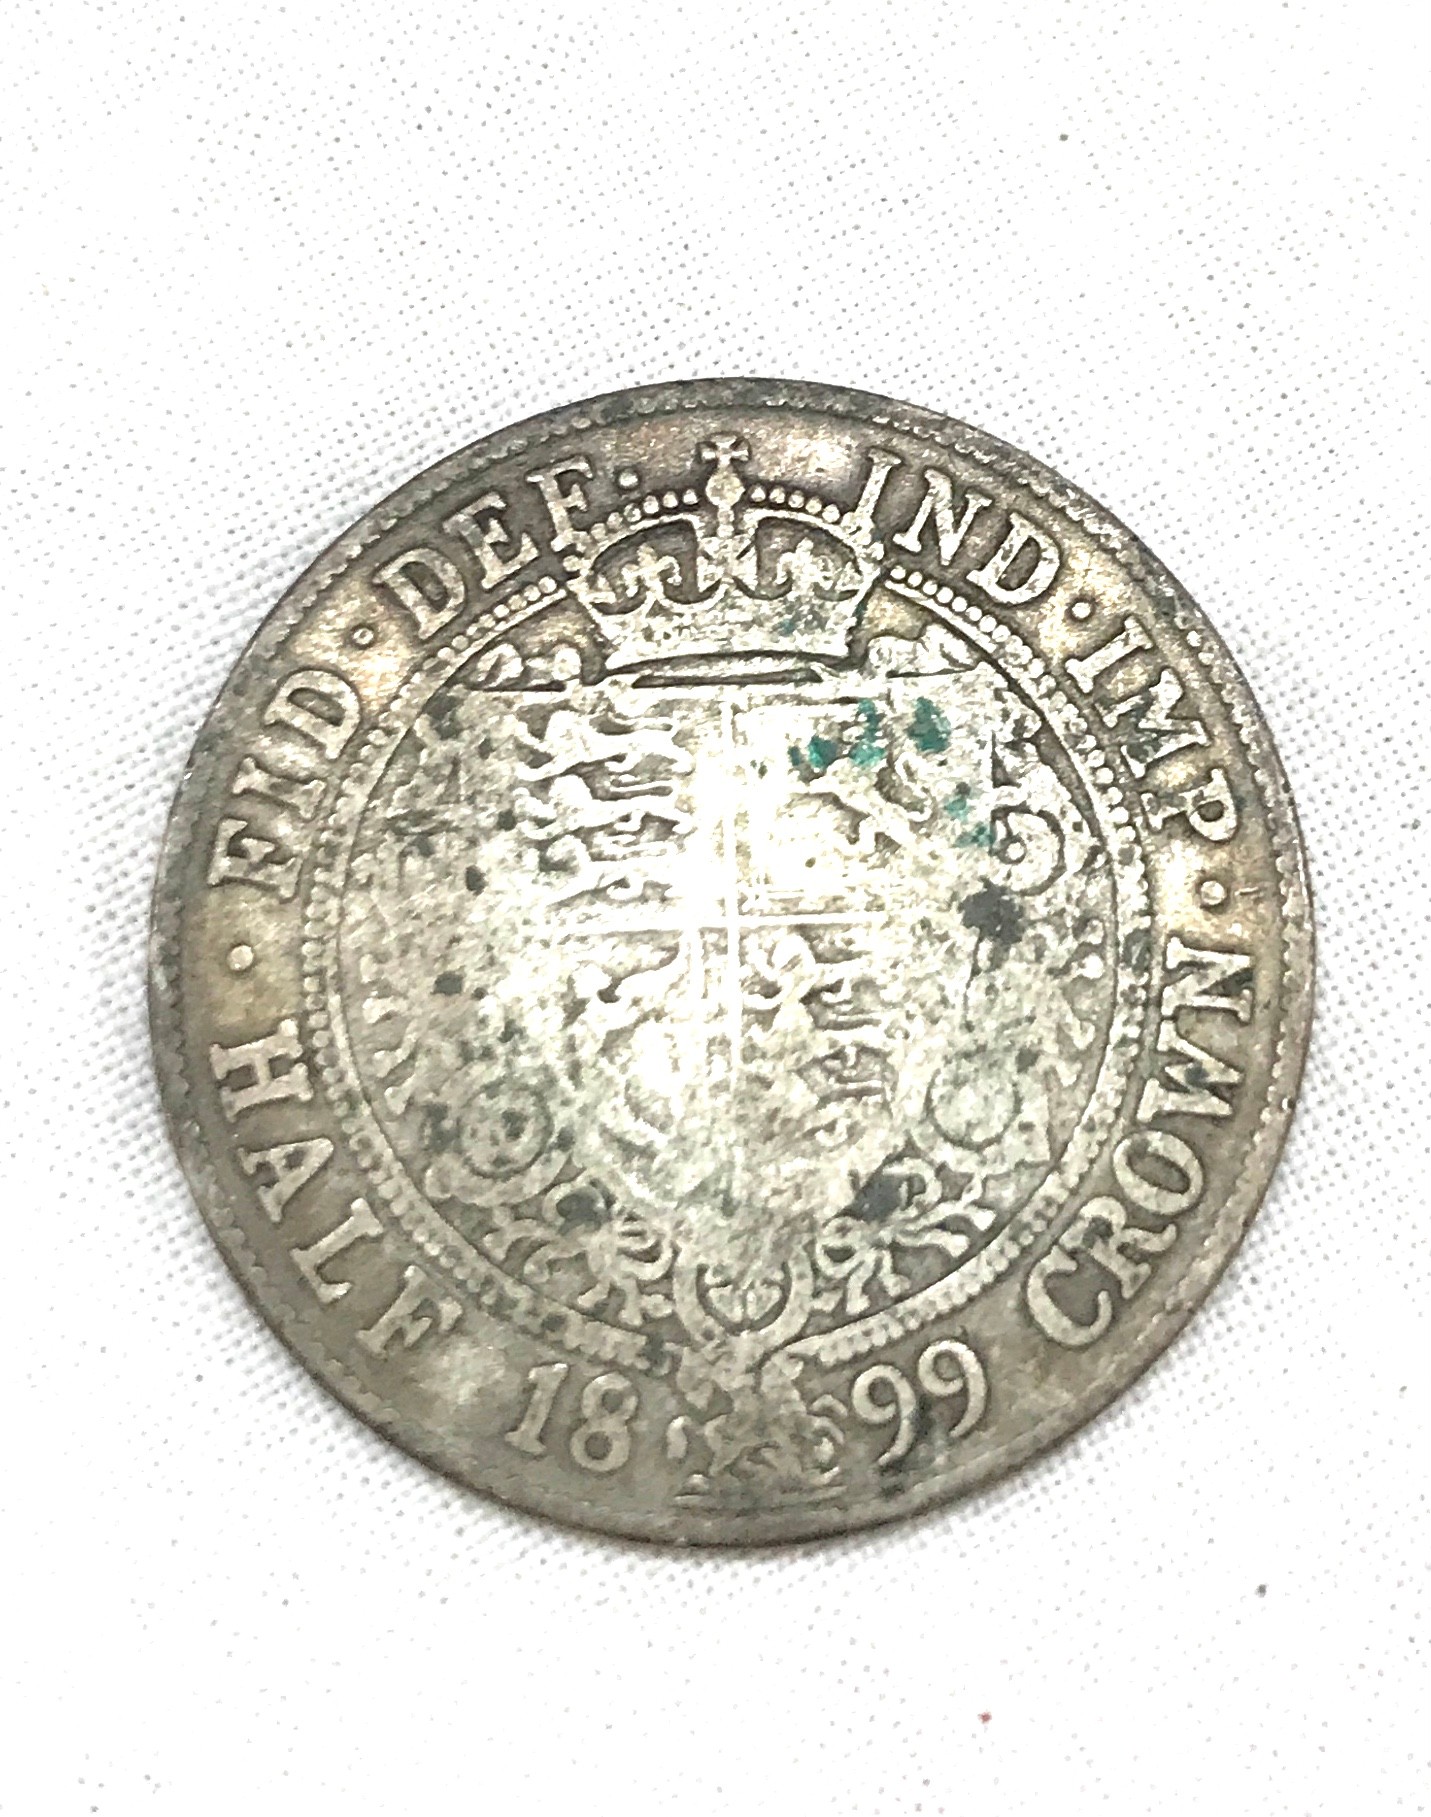 Selection of pre 1900 coins includes 1880, 1896,1898 and 1899 half crowns etc - Image 6 of 27